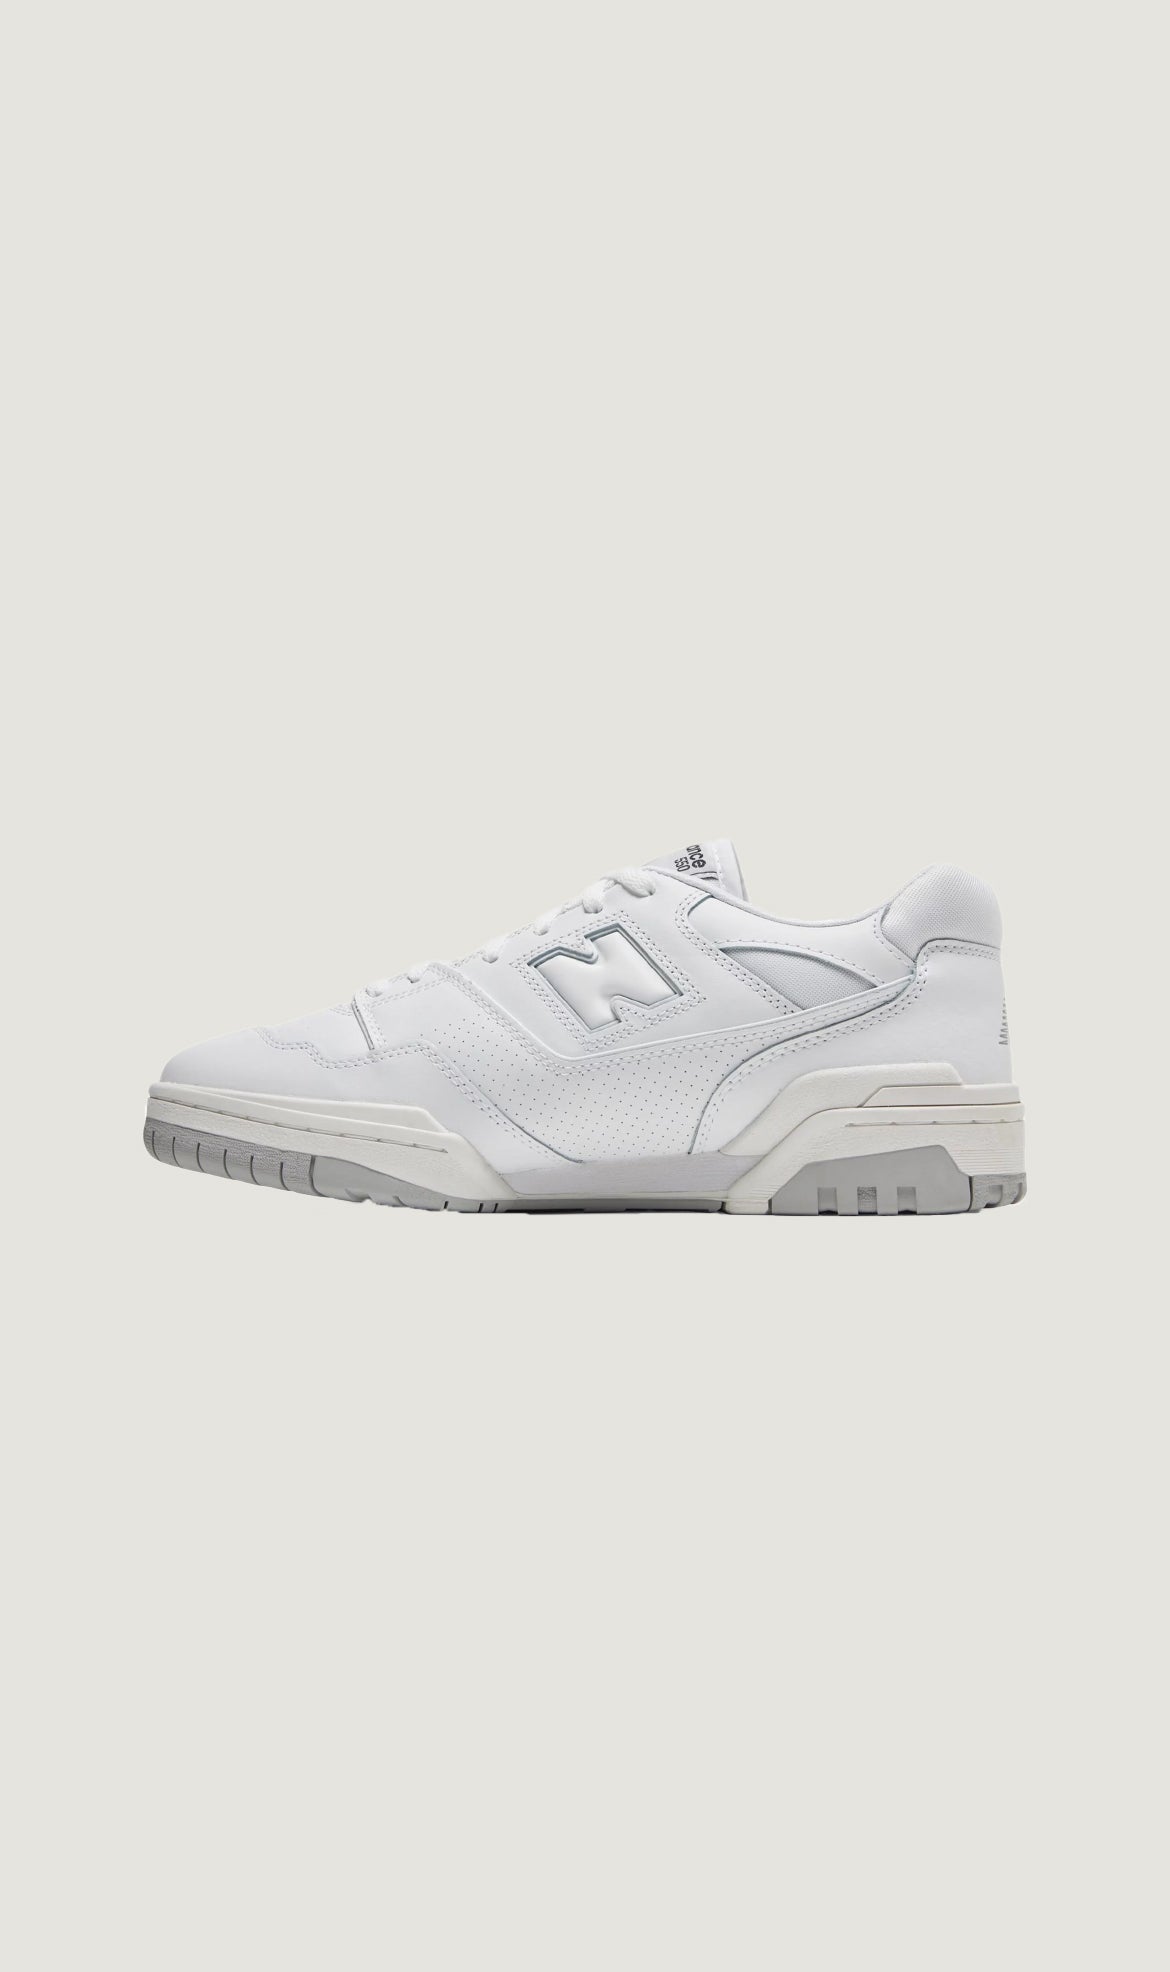 Load image into Gallery viewer, NEW BALANCE 550 - WHITE GREY
